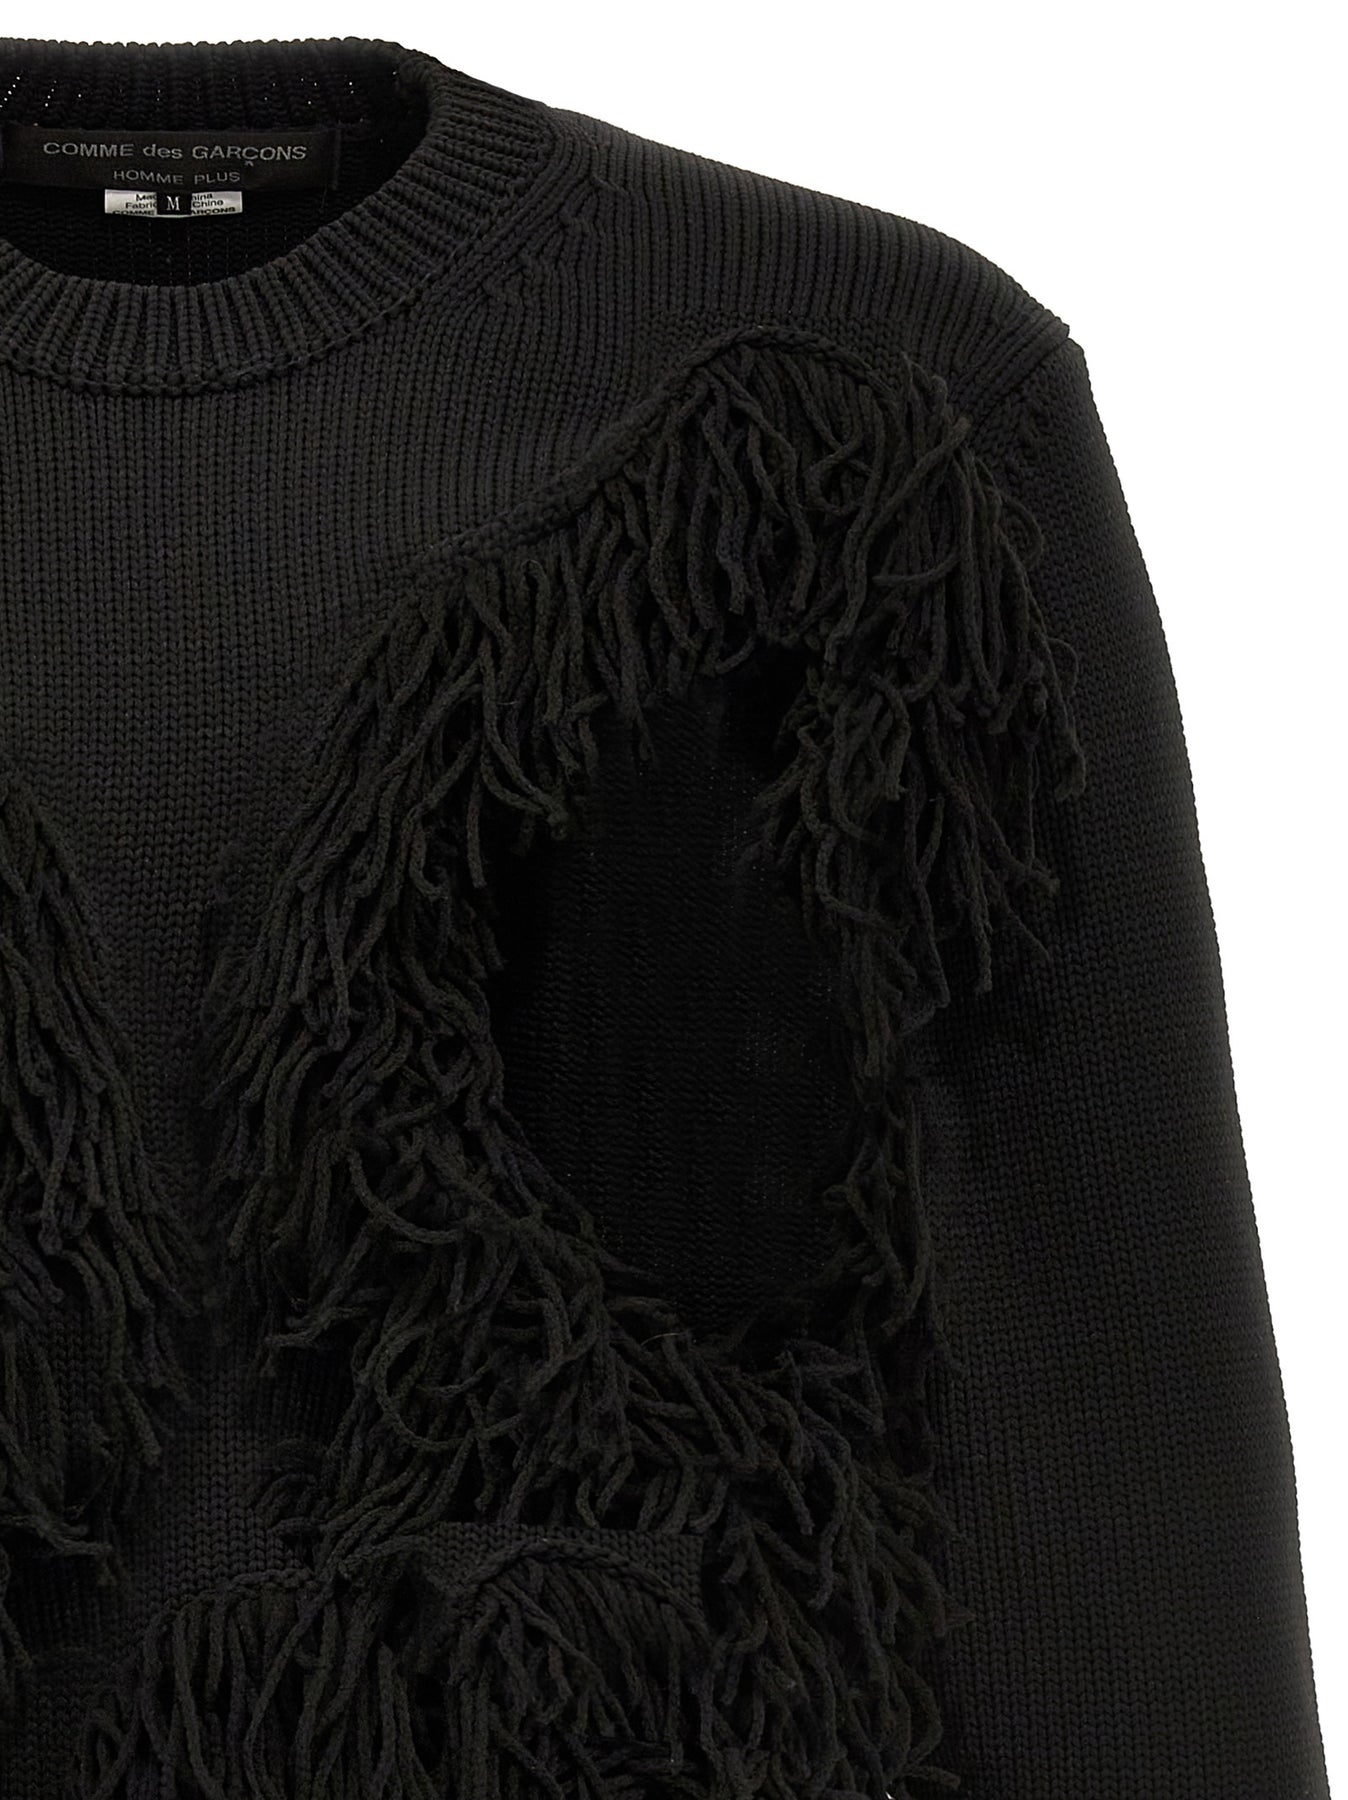 Cut-Out And Fringed Sweater Sweater, Cardigans Black - 3